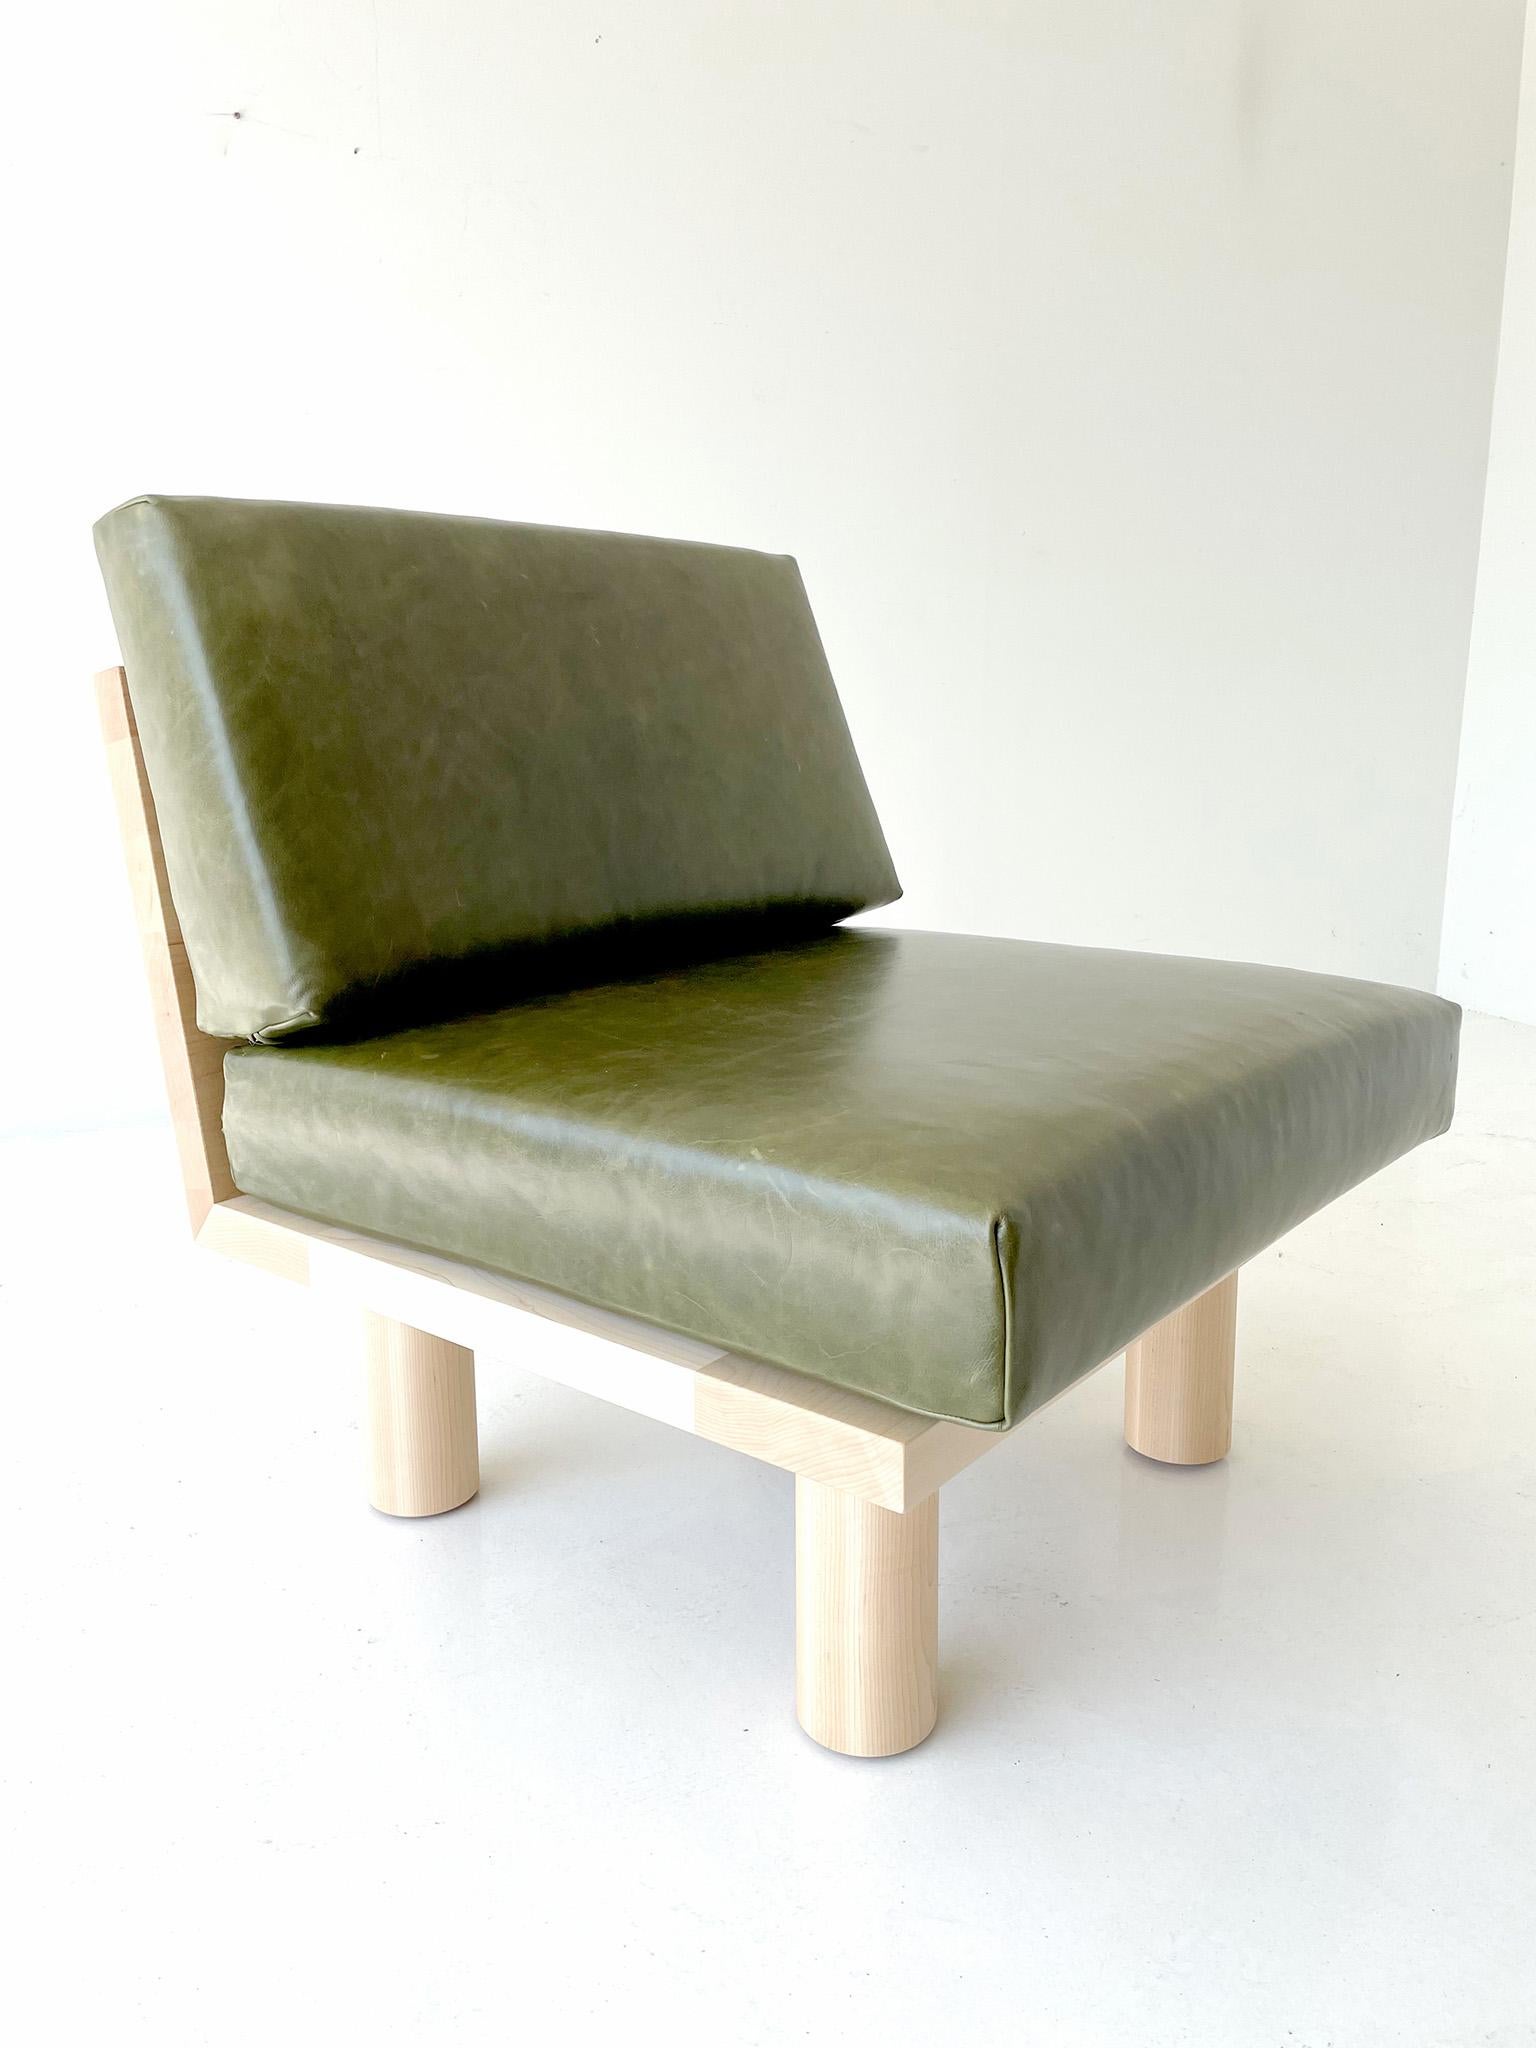 Bertu Side Chair, Suelo Side Chair, Leather and Maple For Sale 2